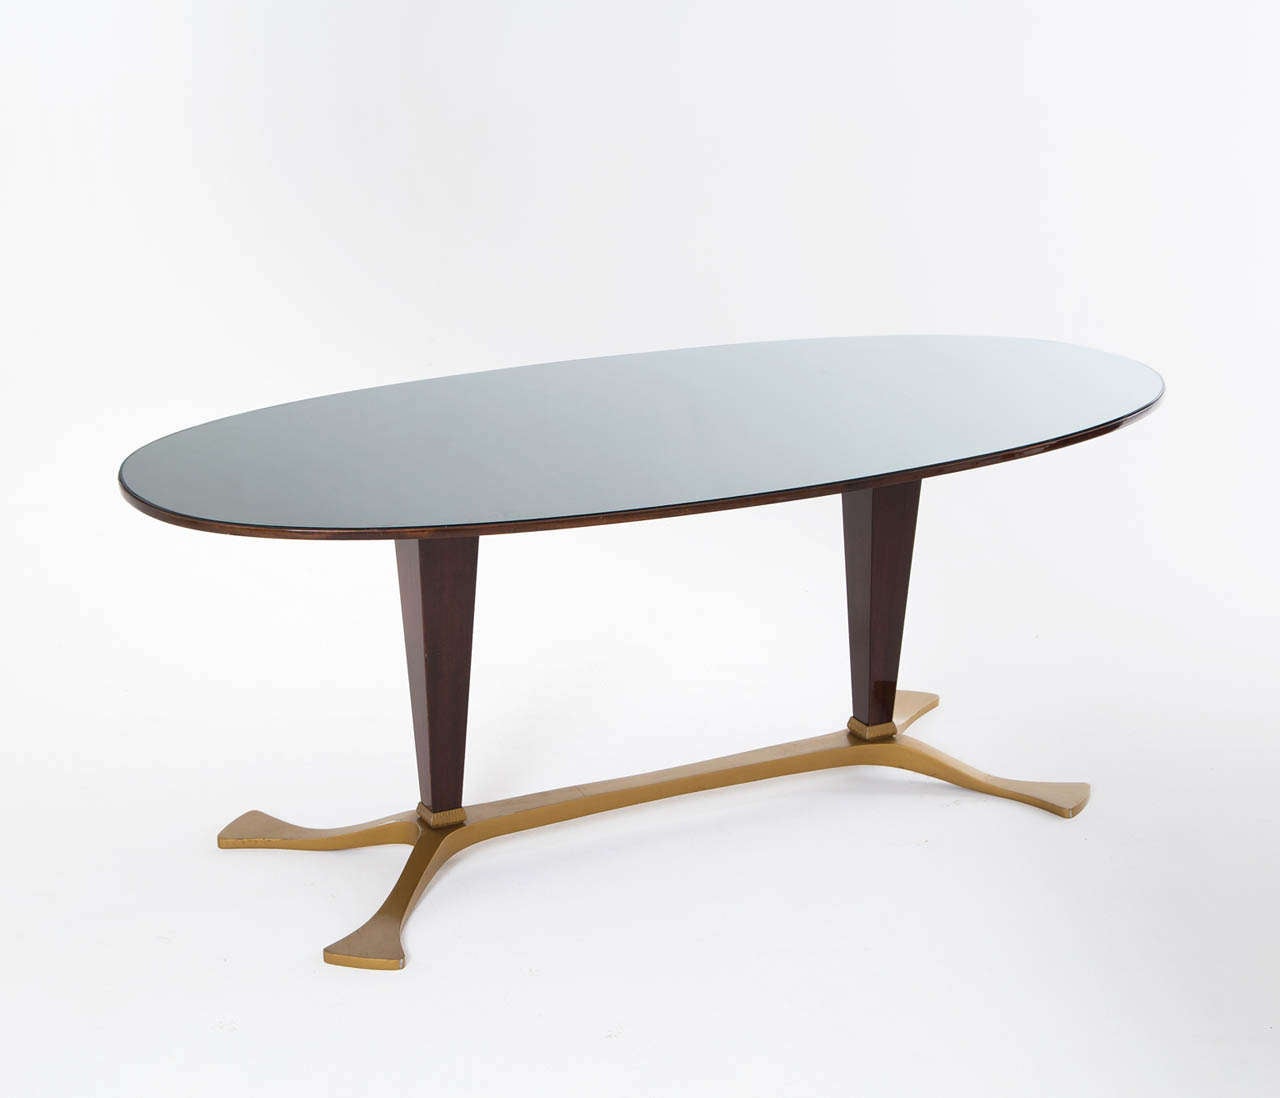 An early Osvaldo Borsani Table, oval shaped, with a elaborately veneered high gloss top and a thin layer of glass, creating beautiful refractions in dark and light, standing on a rosewood veneered / brass colored base.